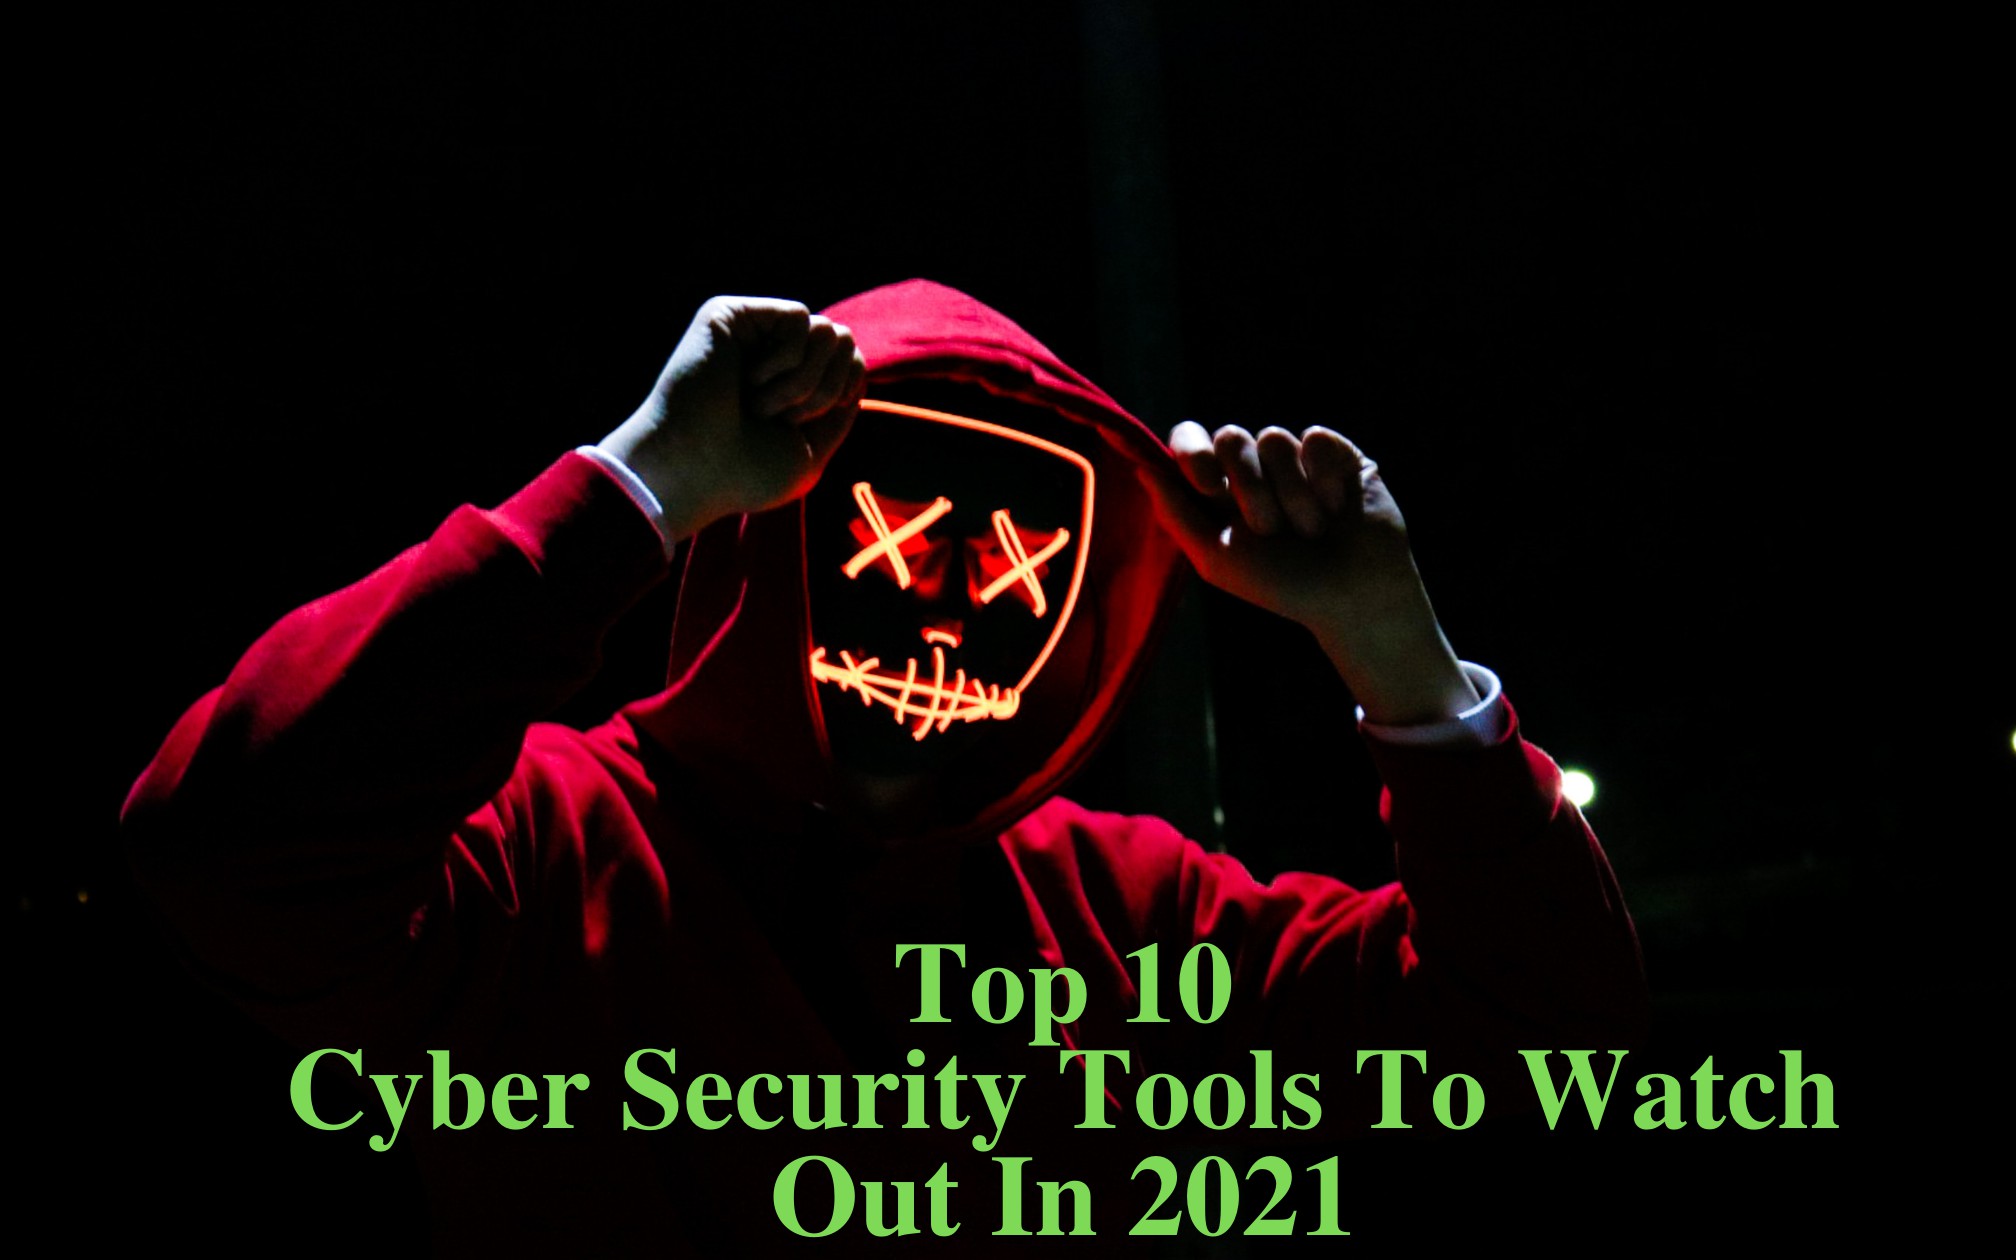 10 Cyber Security Tools to Watch Out for in 2021 - DZone Security